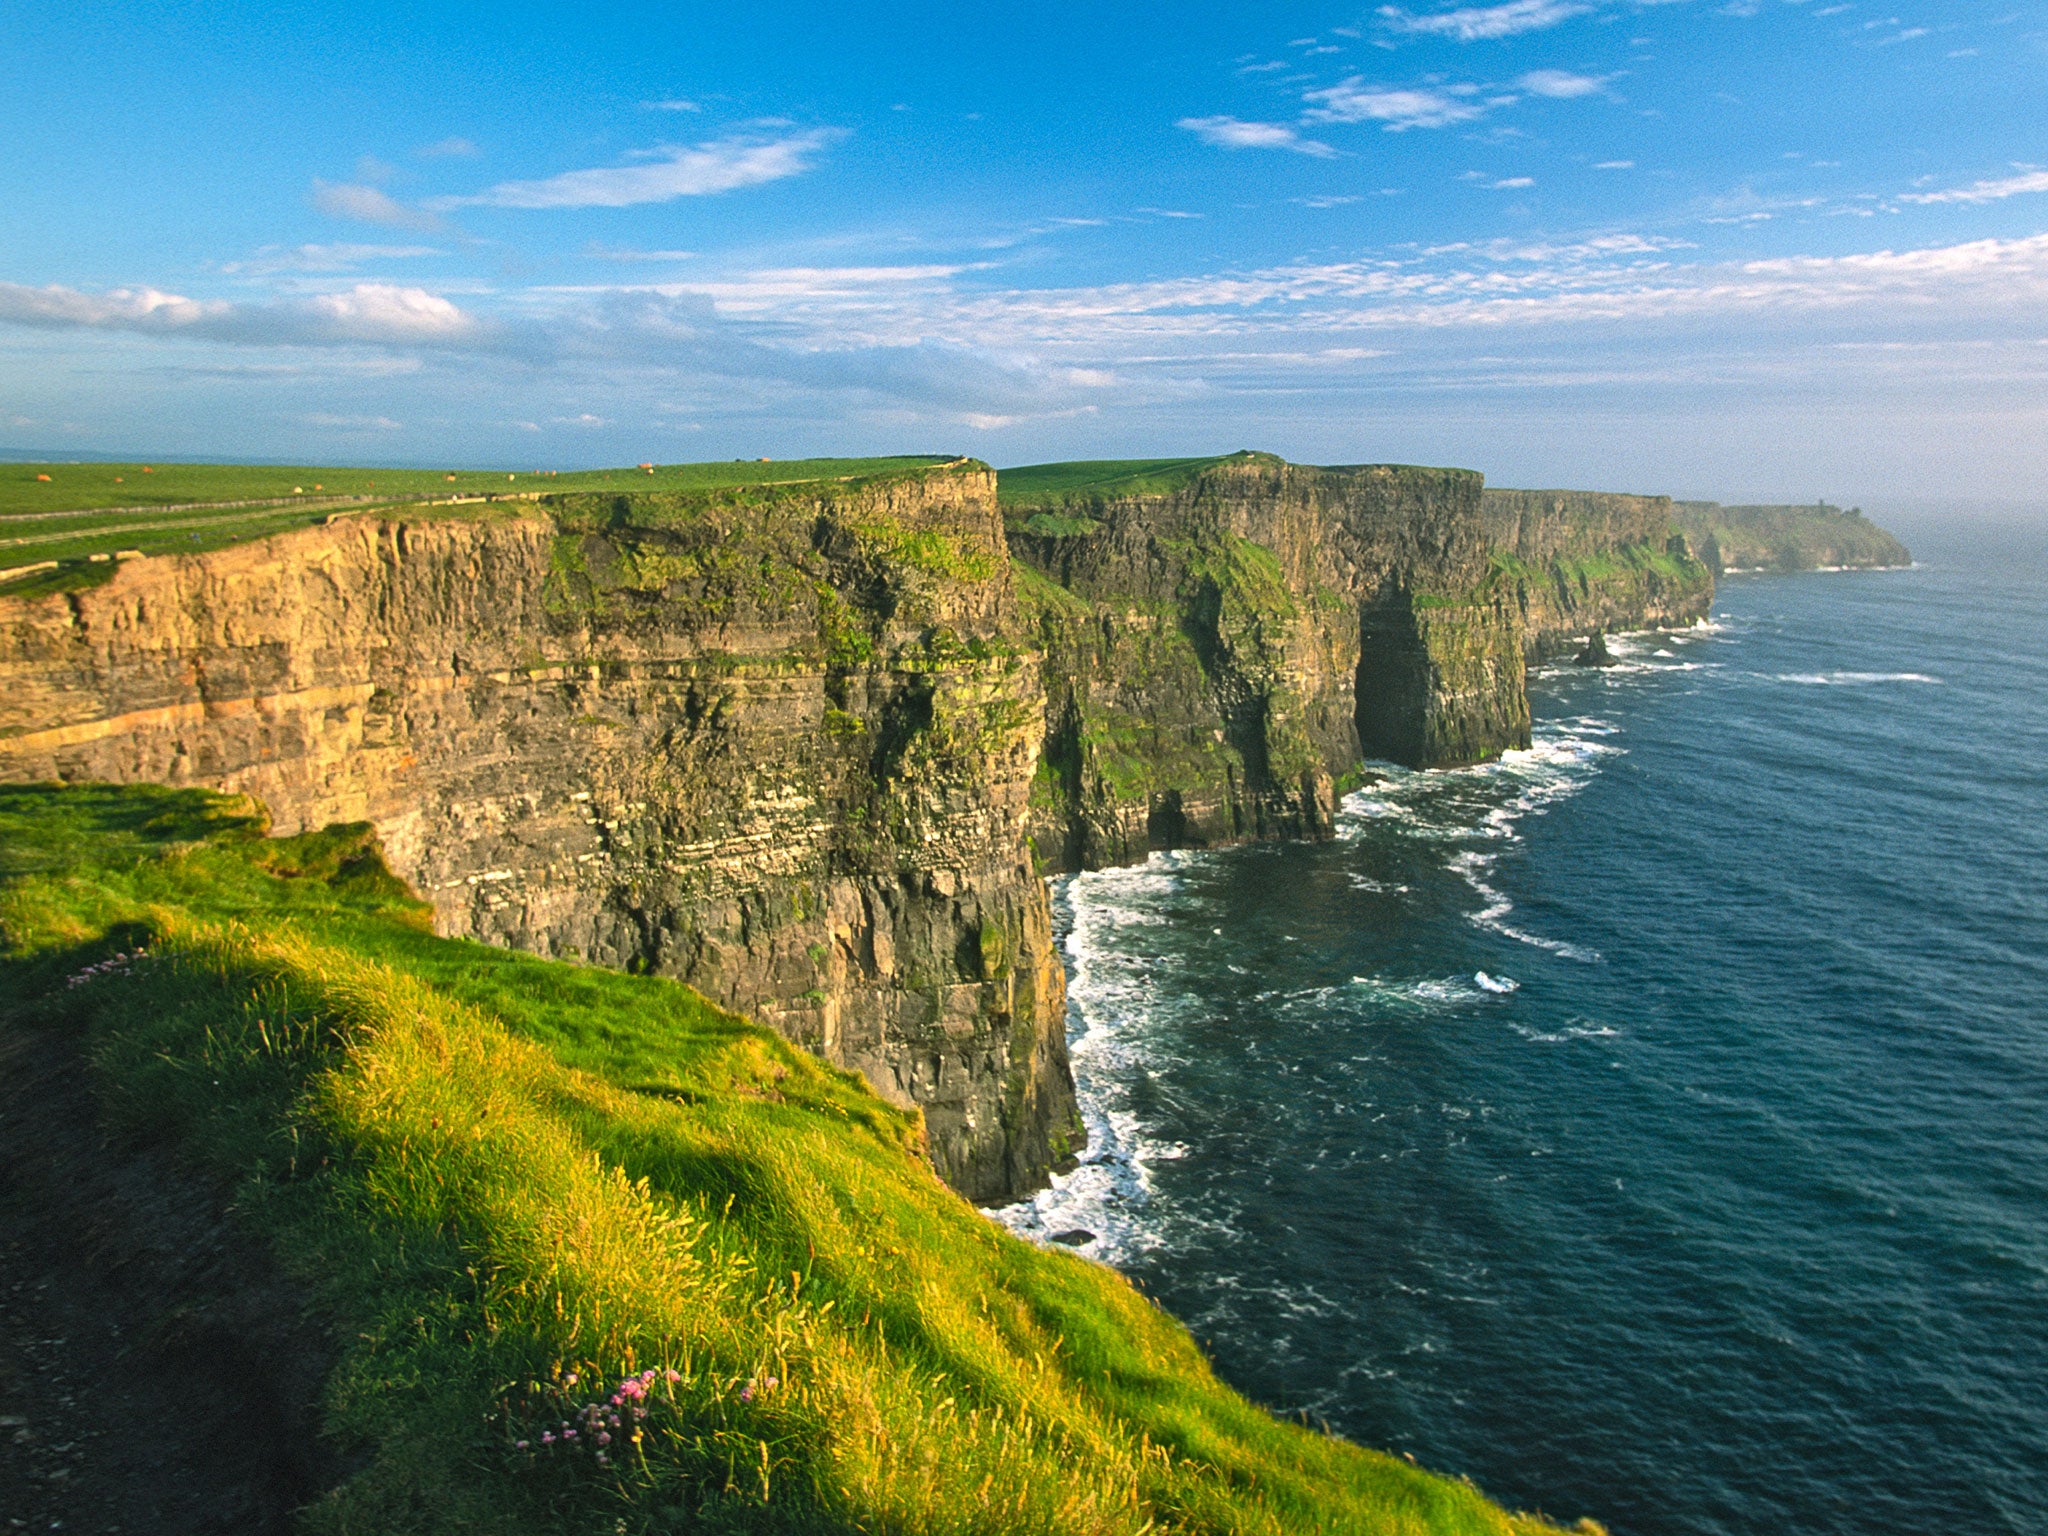 The accident happened while the man was trying to take a selfie of the famous Cliffs of Moher